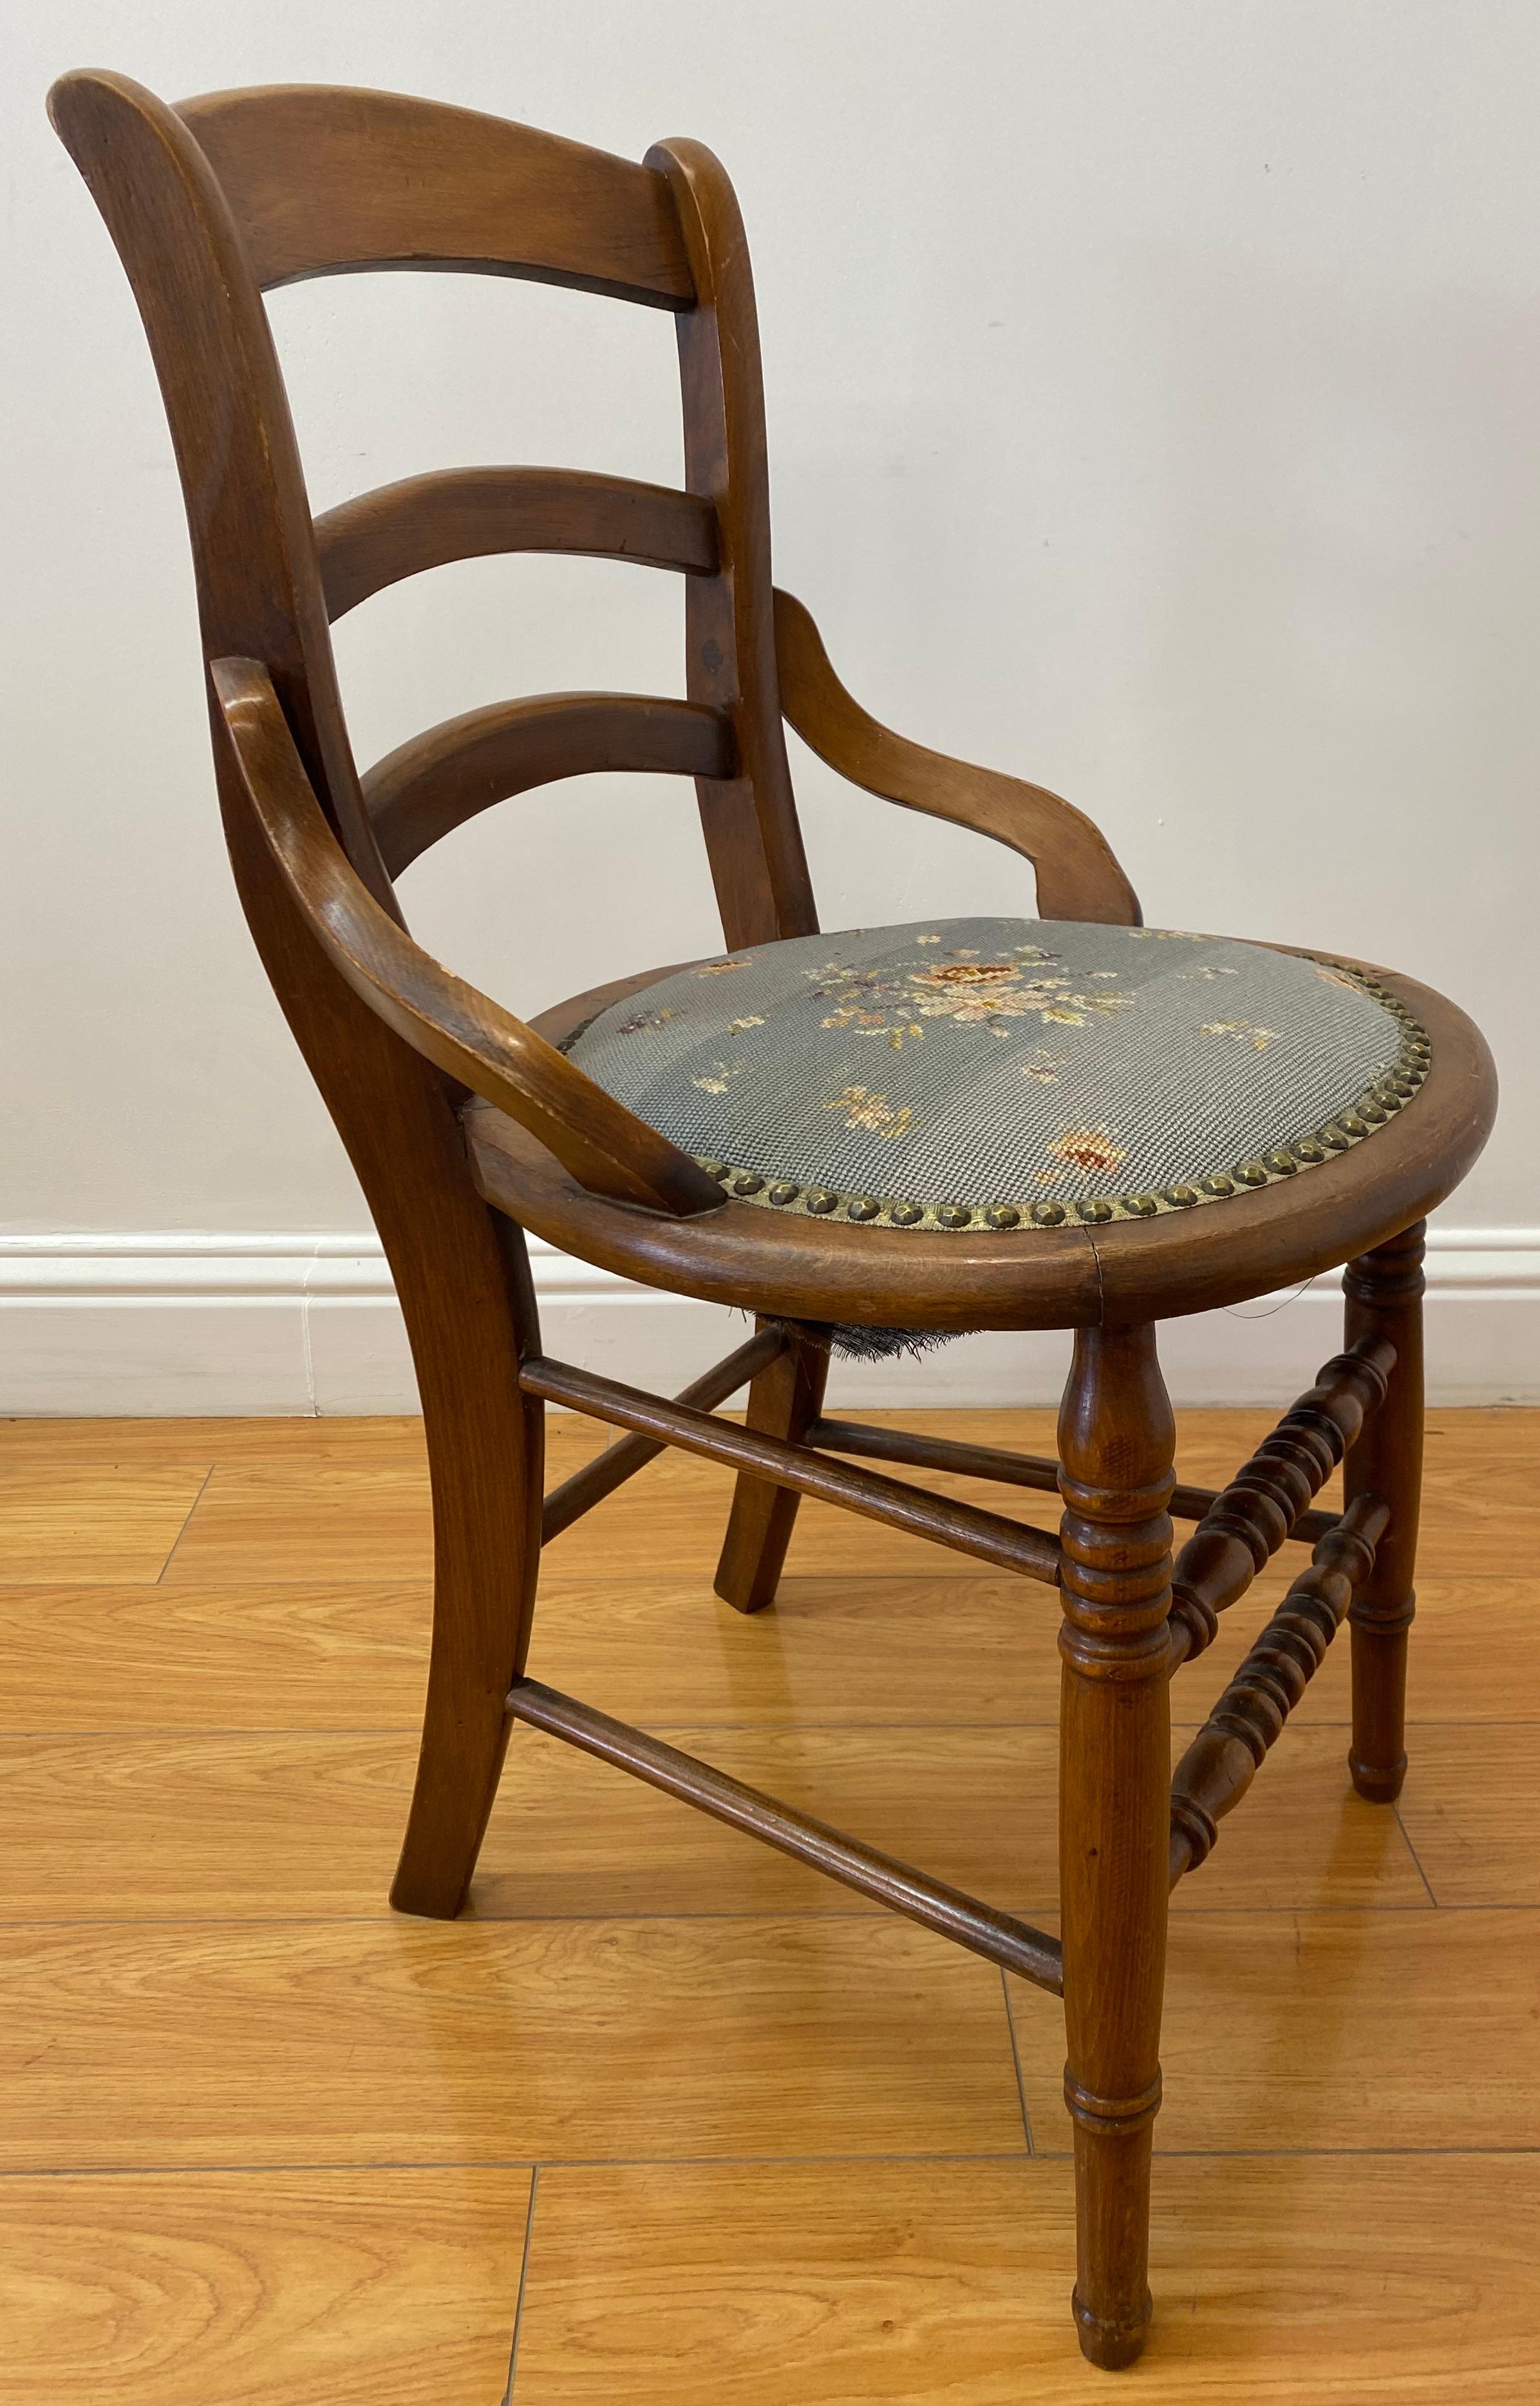 Mid 19th century American walnut chair w/ needlepoint seat C.1870

Outstanding American side chair with turned legs, slat back and needlepoint seat

The seat covering was added in the early 20th century - The frame is decades older

18